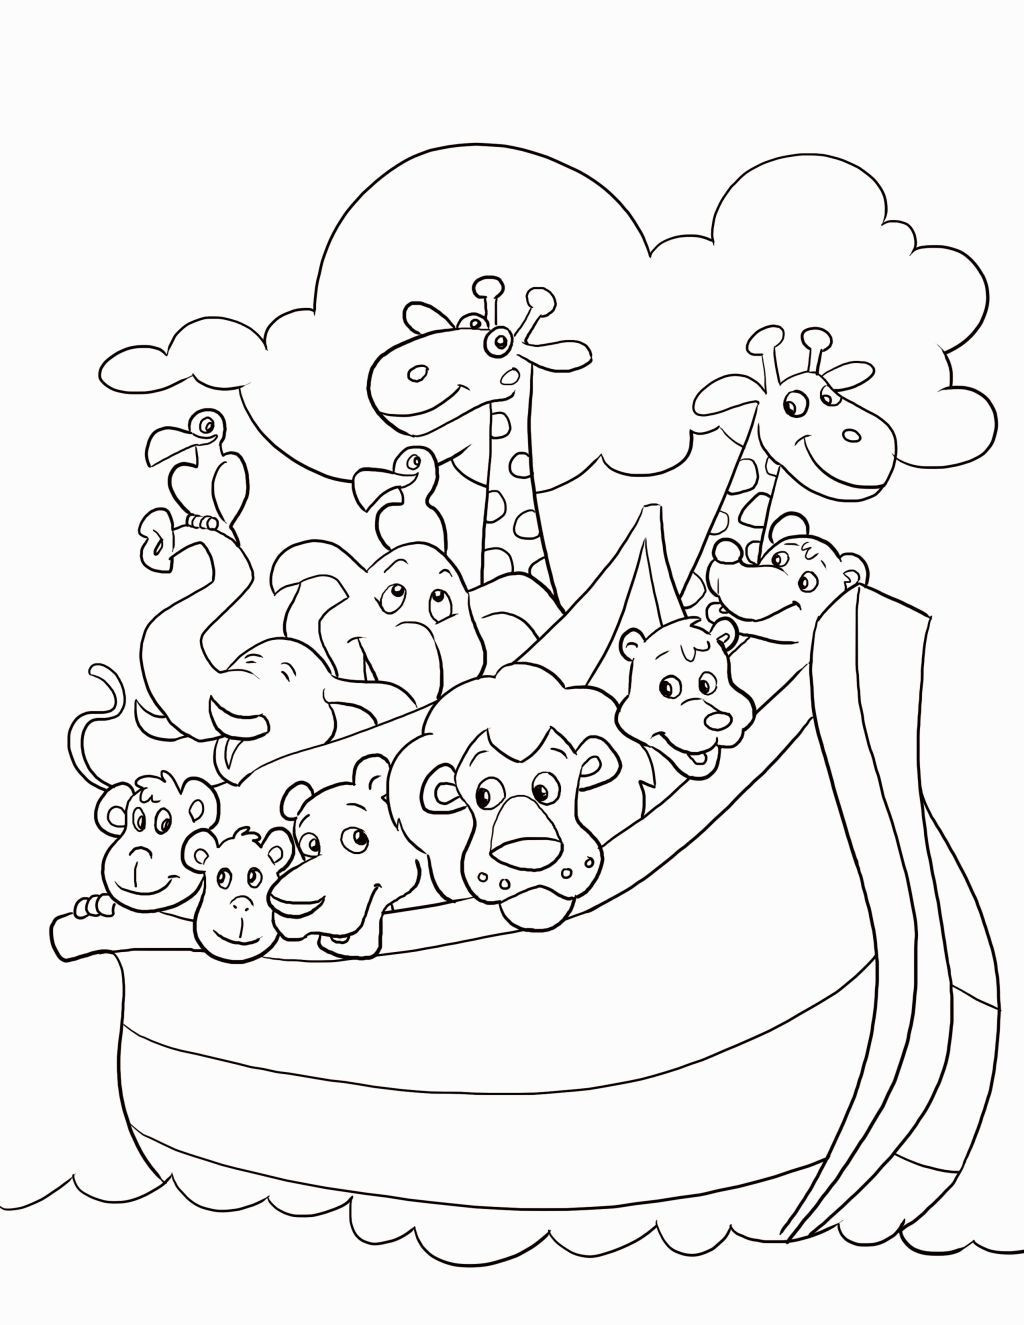 Christian Coloring Book For Kids
 Christian Coloring Pages For Preschoolers